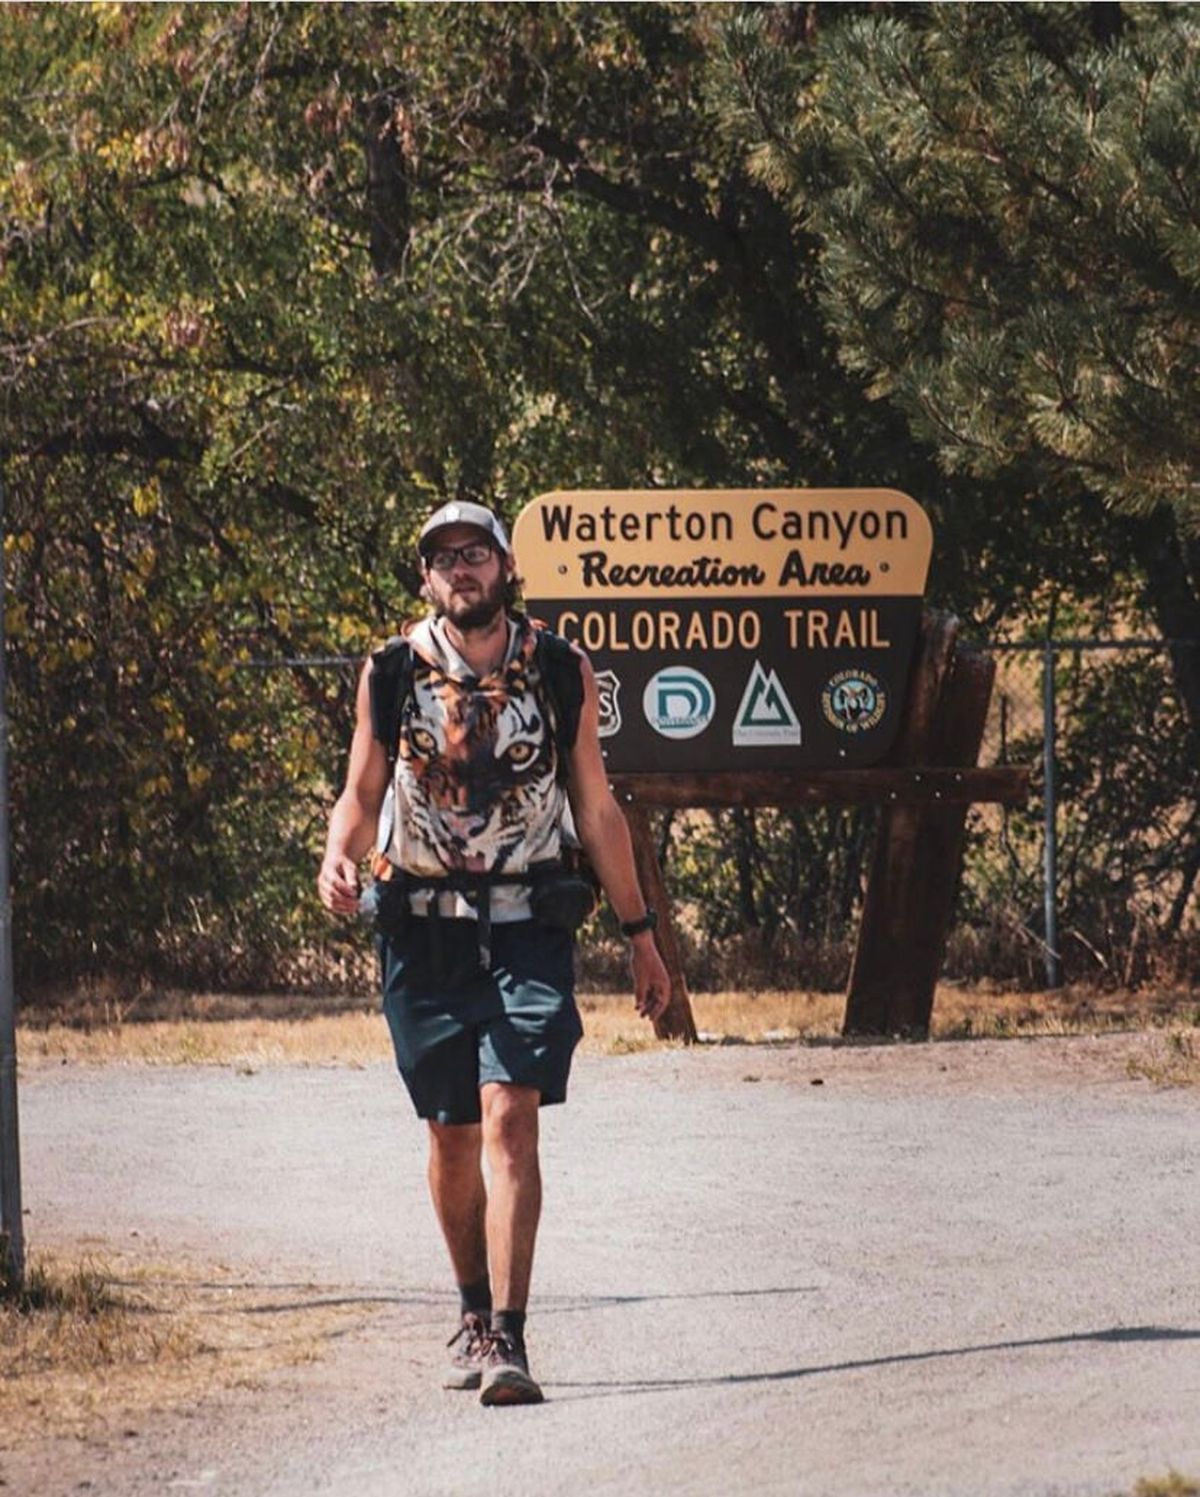 Jeff Garmire seen 50 feet from the finish of the Colorado Trail.  (Courtesy of Elisabeth Tizekker)